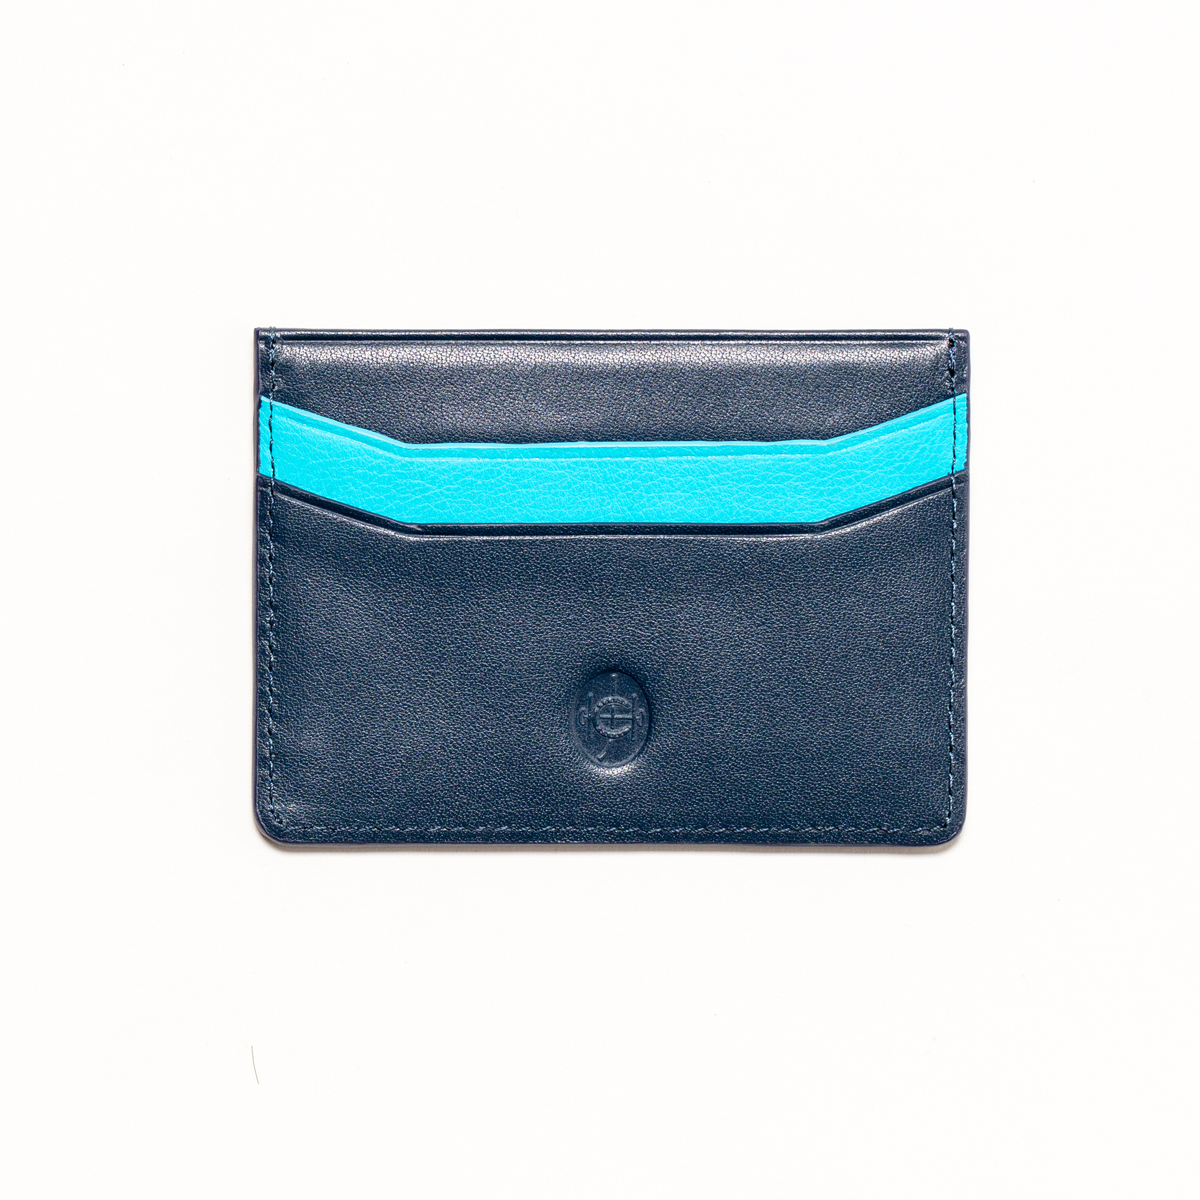 Two-toned leather card holder as complimentary door gifts